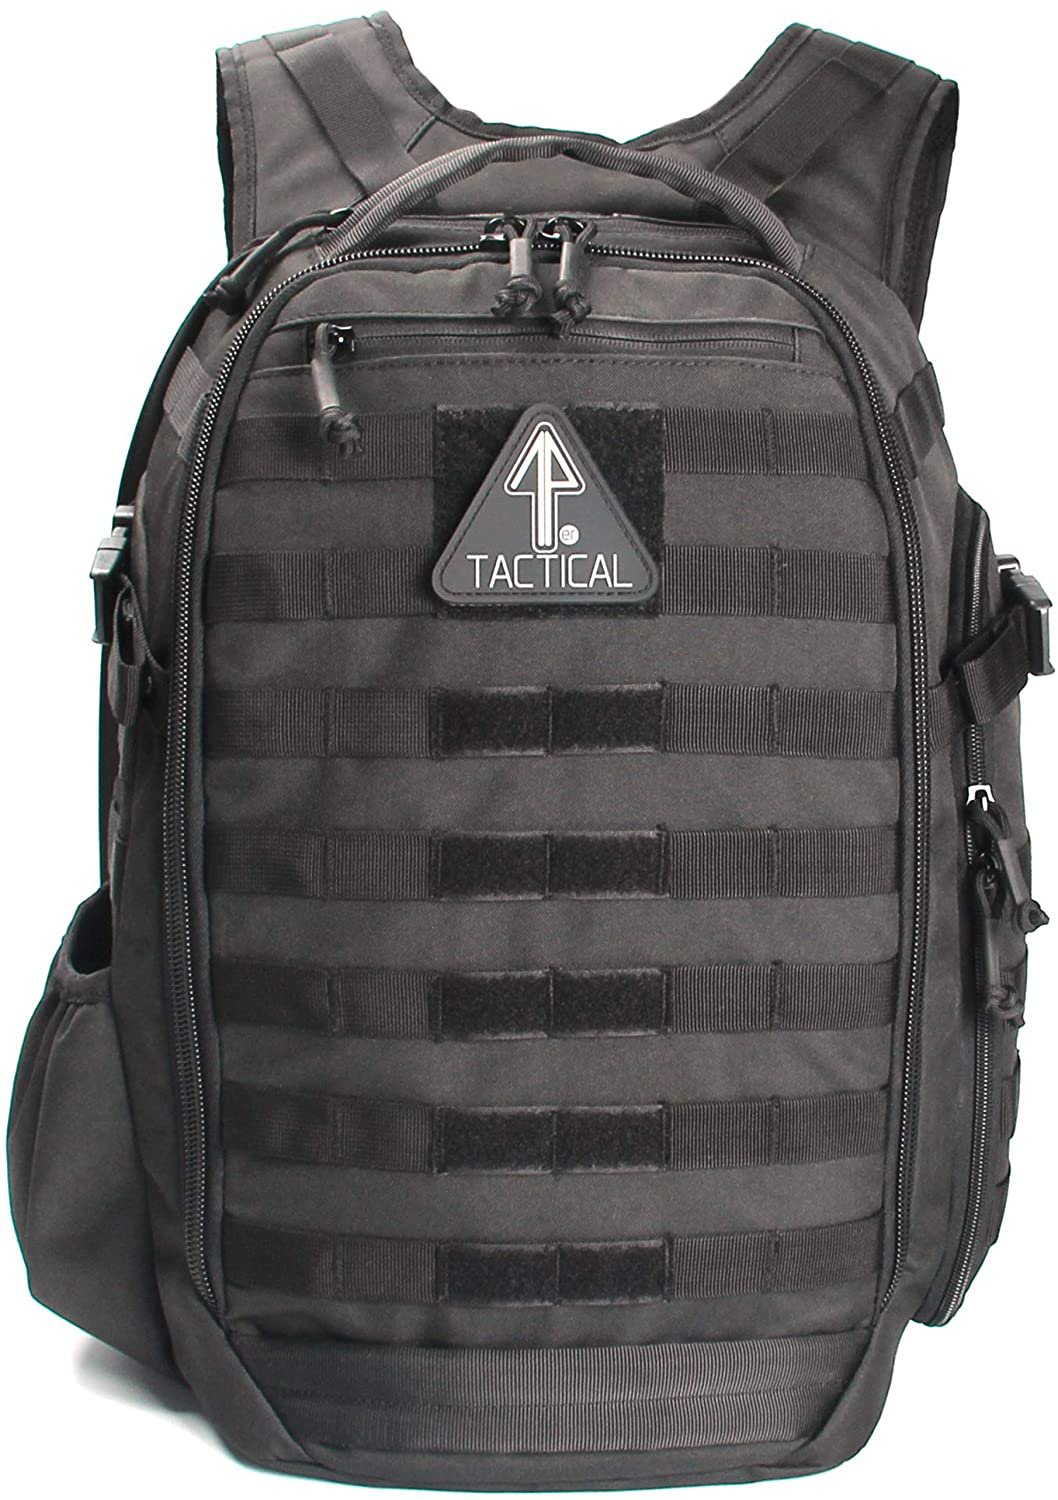 35L Tactical Water Resistant Backpack